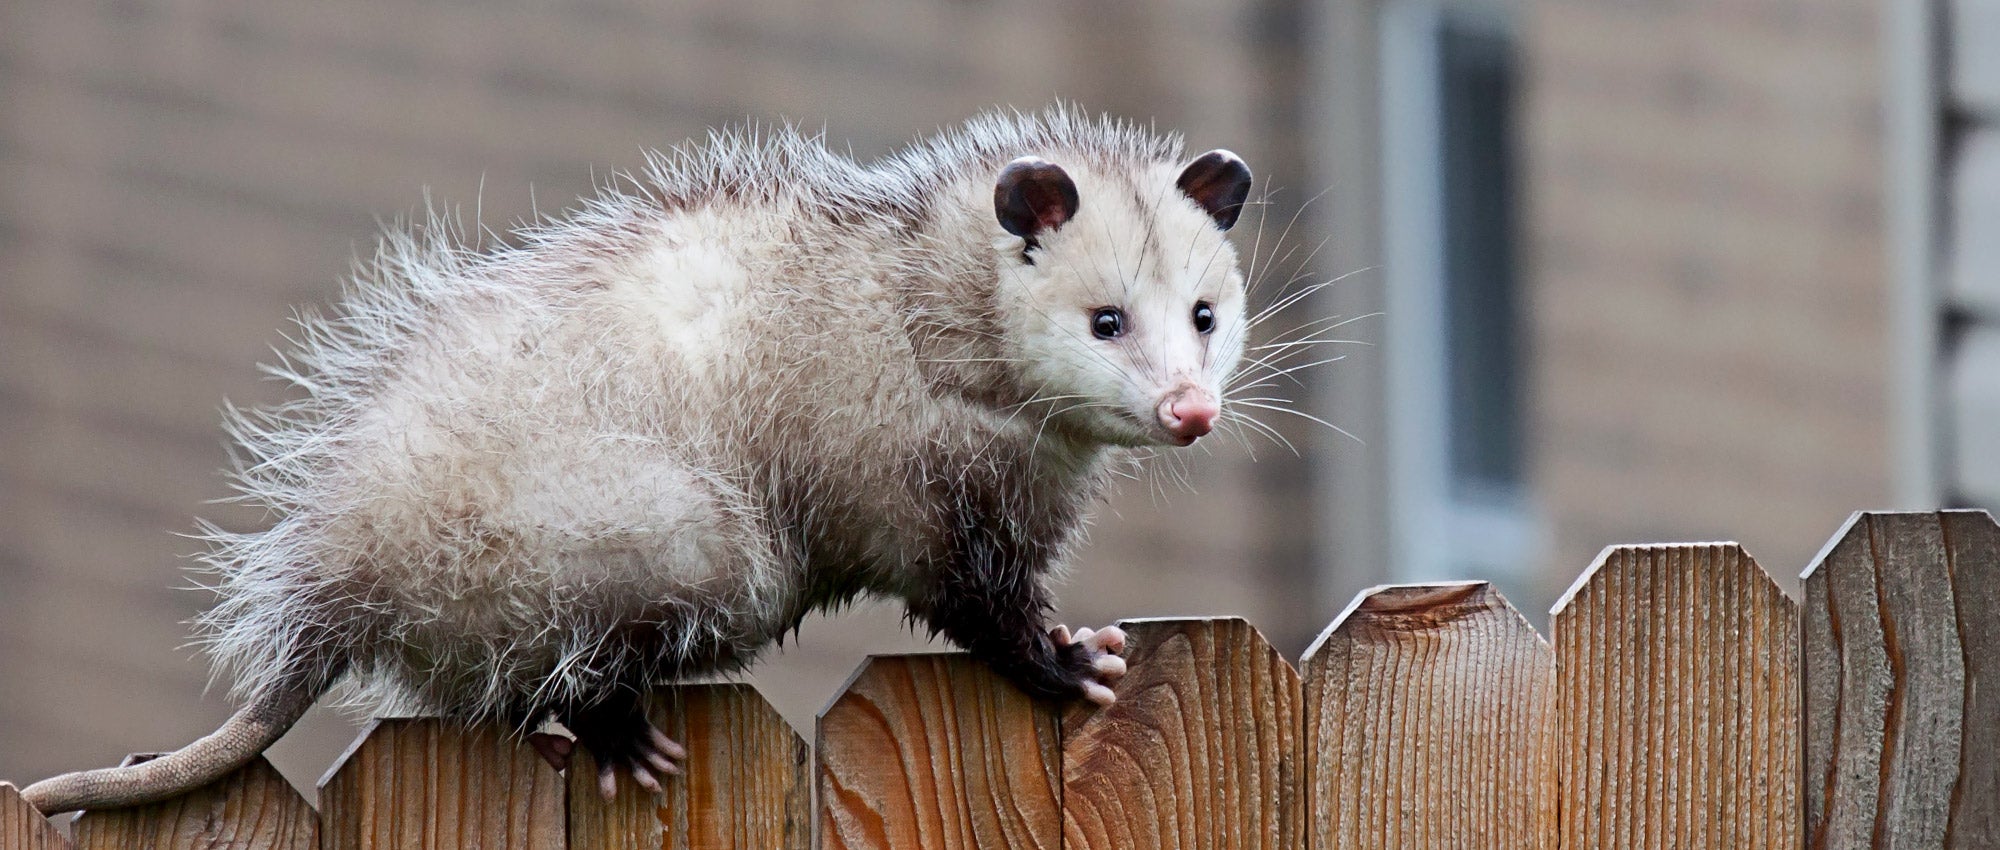 What to do about opossums | The Humane Society of the United States